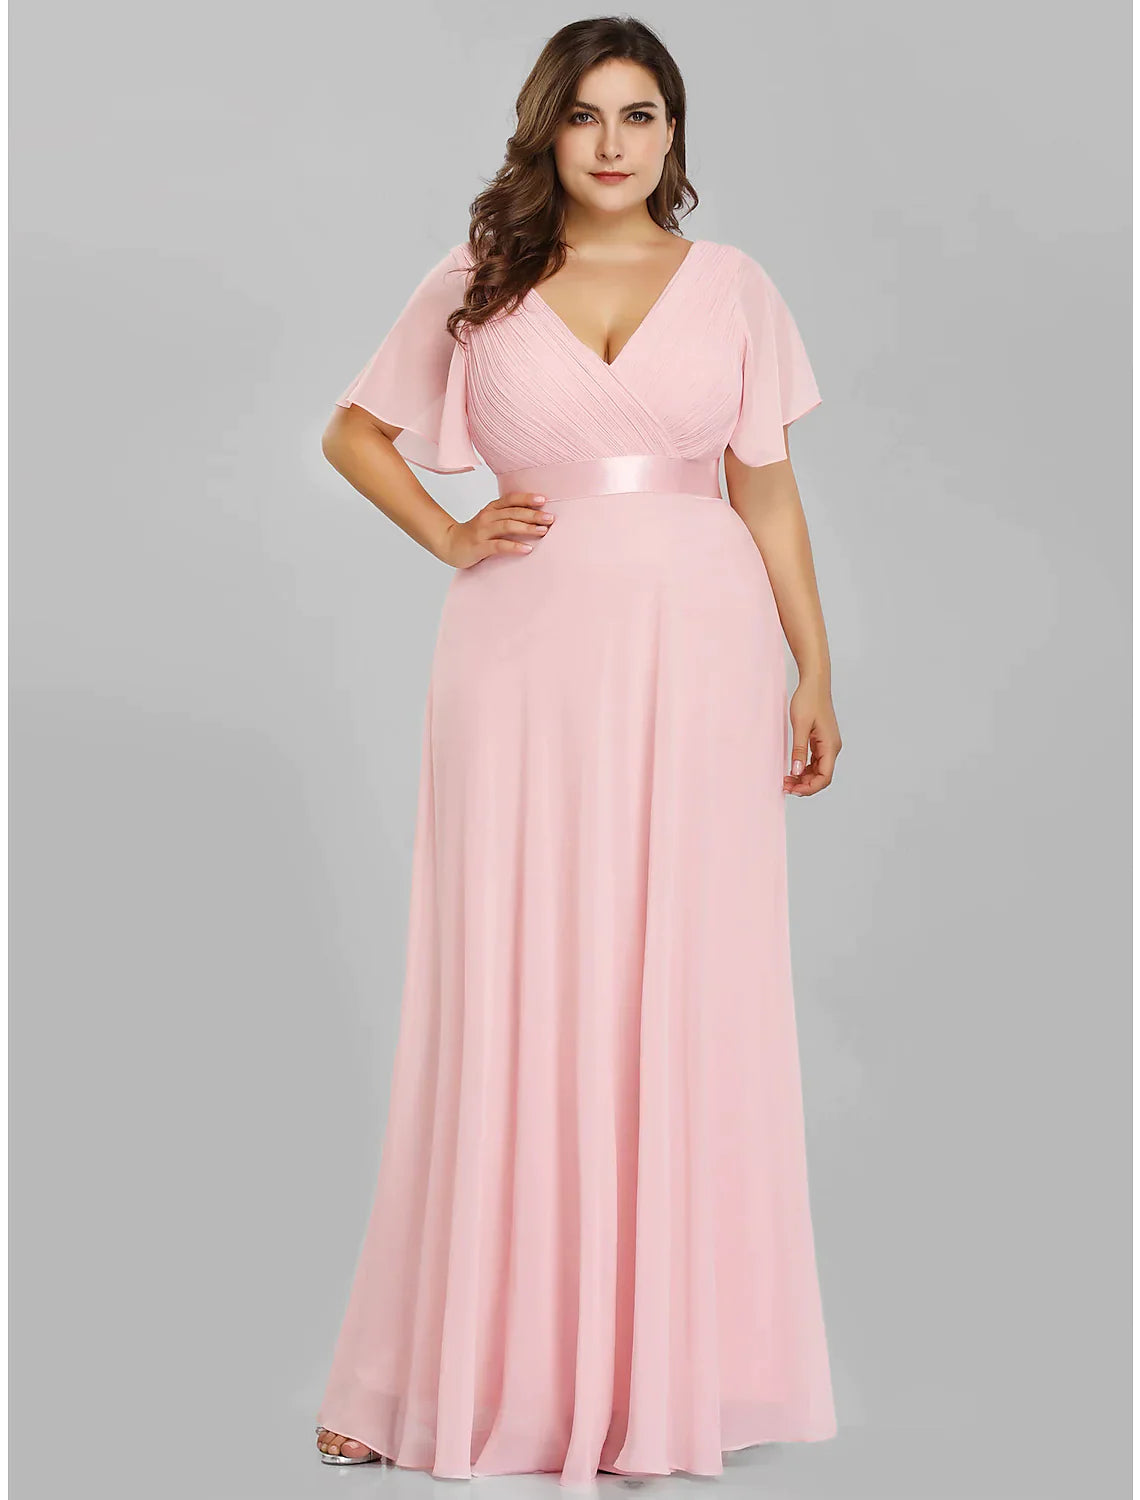 A-Line Plus Size Prom Formal Evening Dress V Neck V Back Short Sleeve Floor Length Chiffon with Pleats Ruched